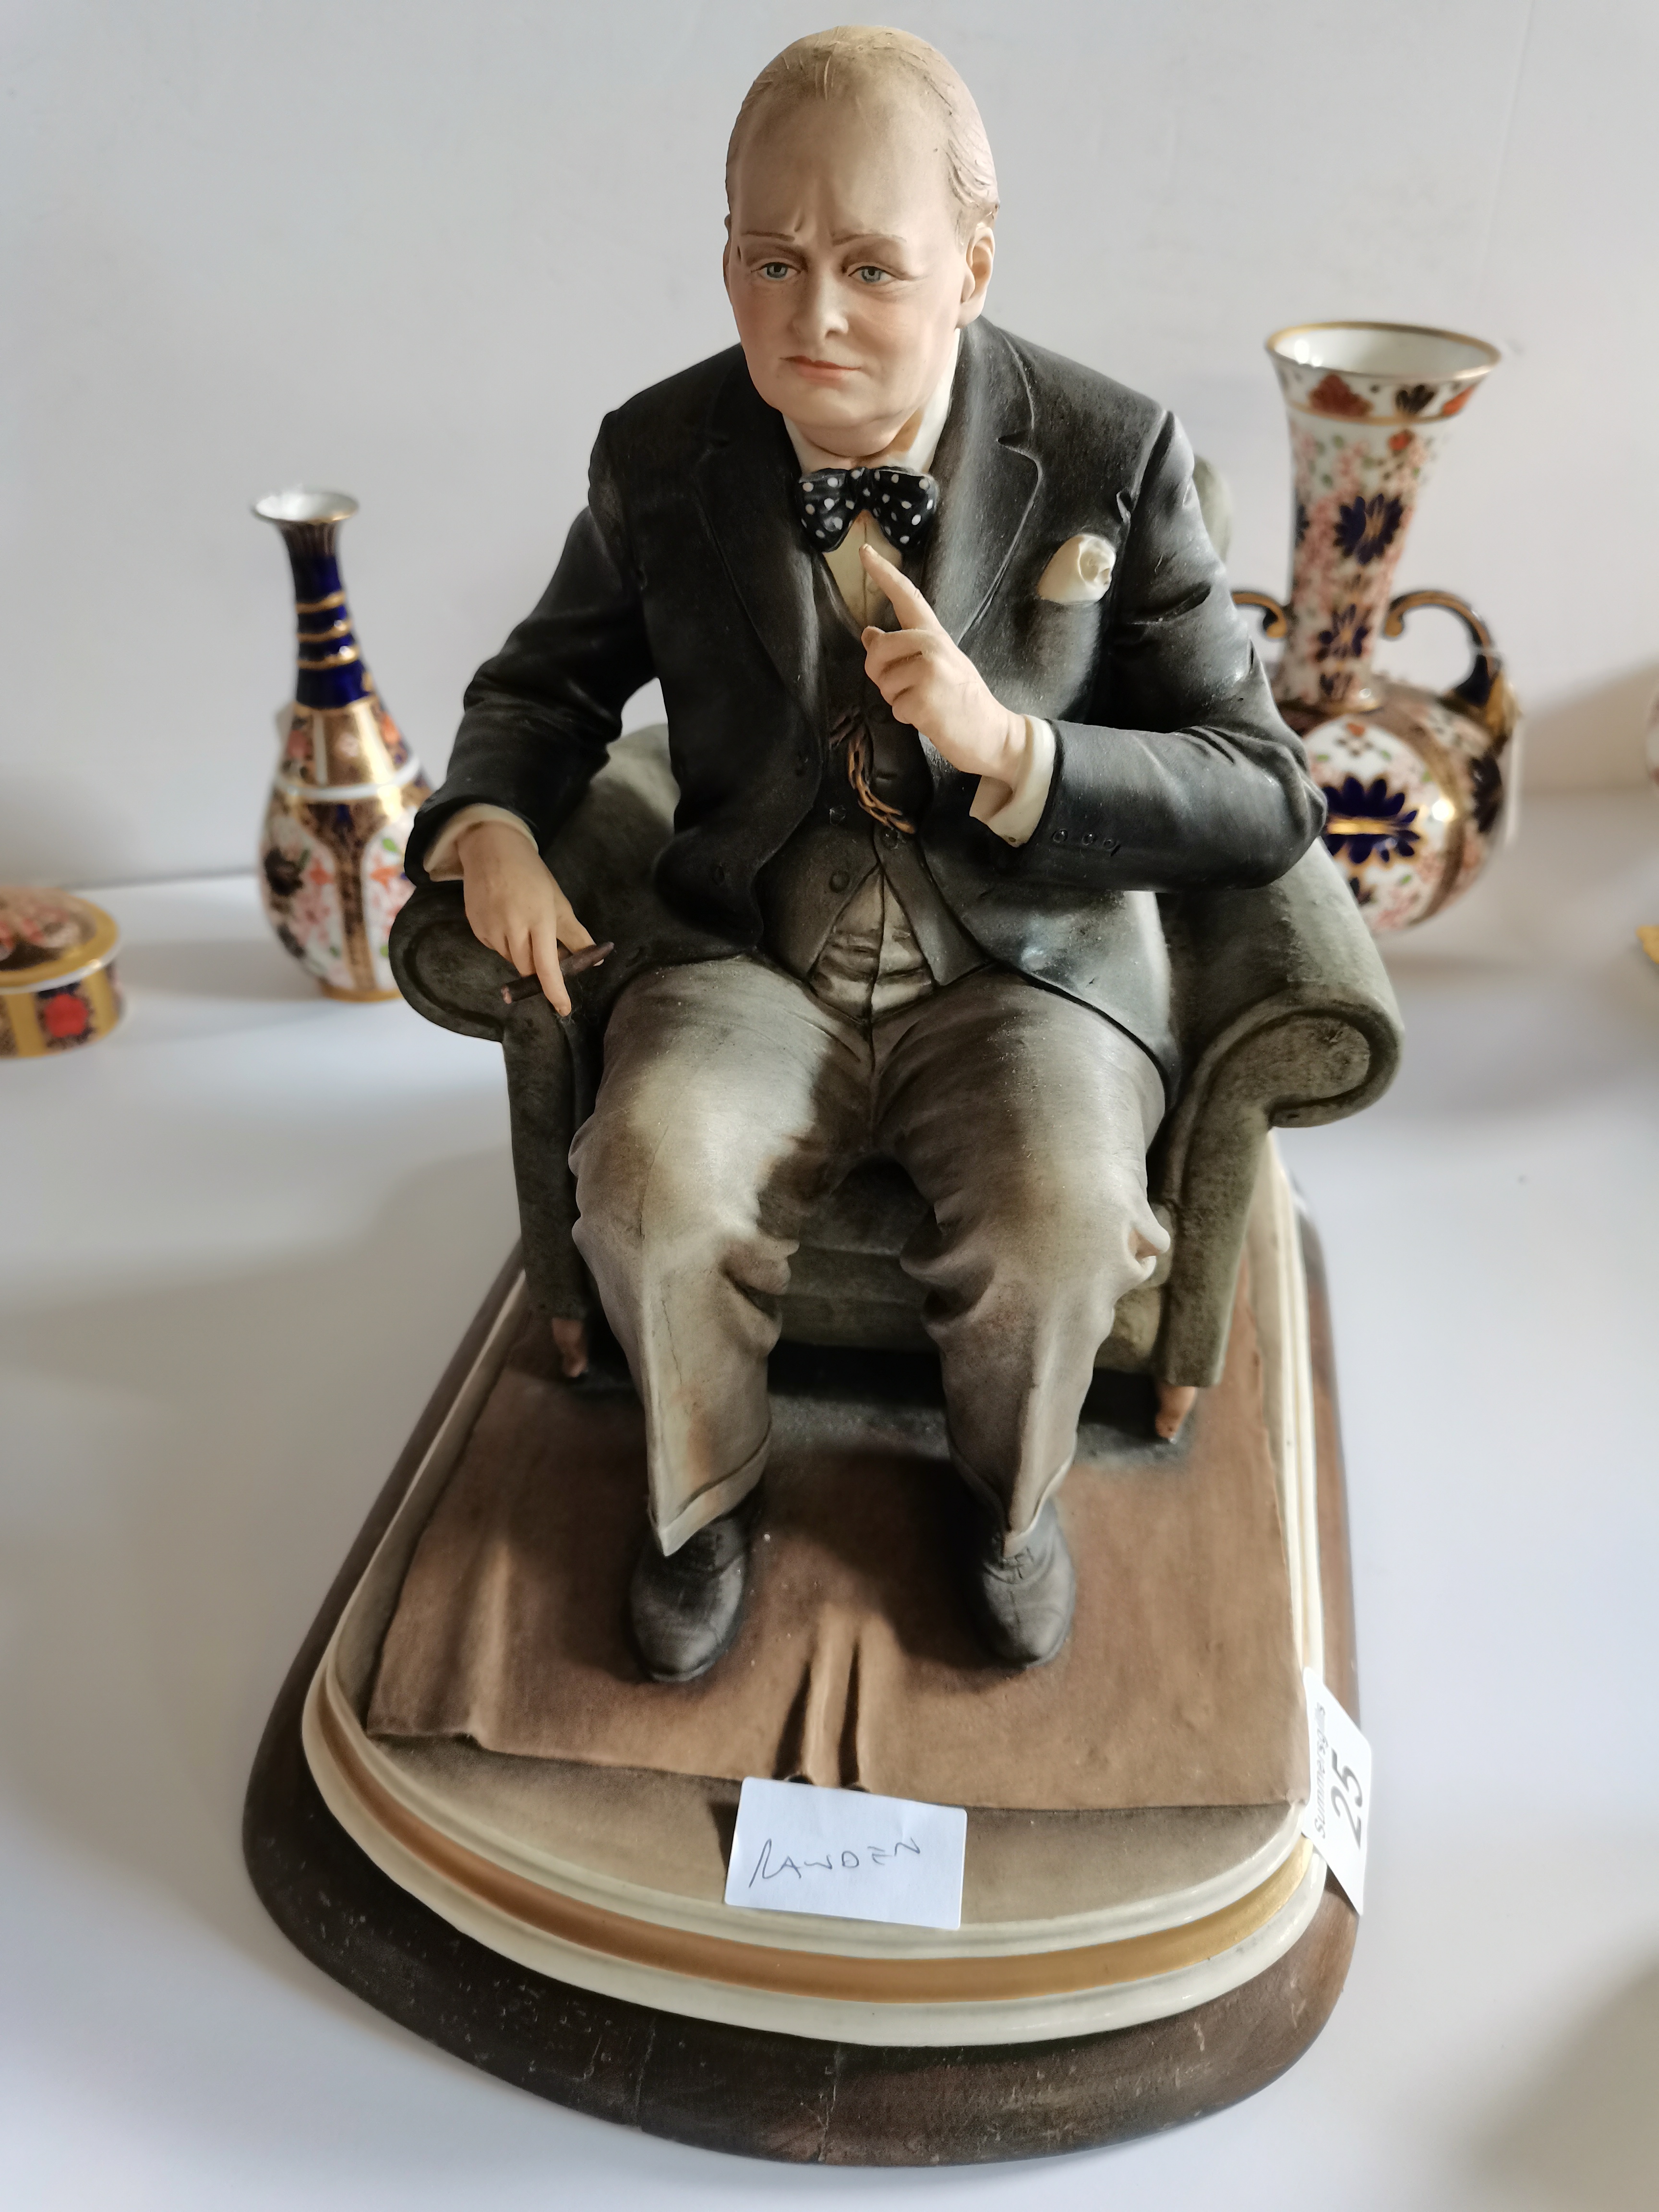 Capodemonte Winston Churchill Pot Figure on a stand ( ex. Condition ) - Image 5 of 6